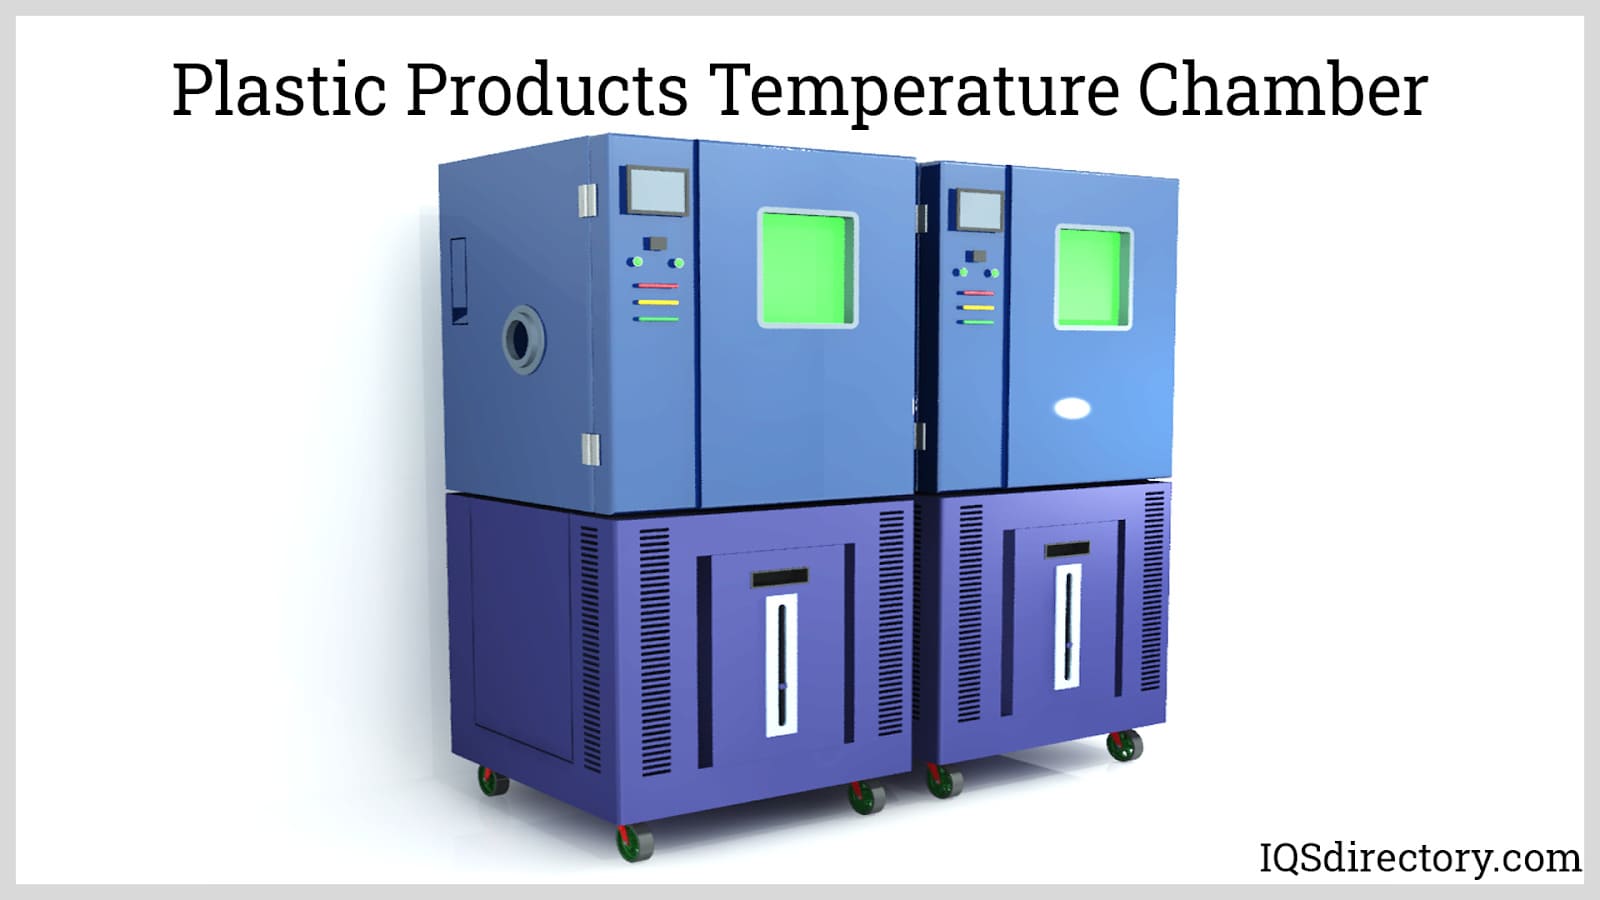 Plastic Products Temperature Chamber